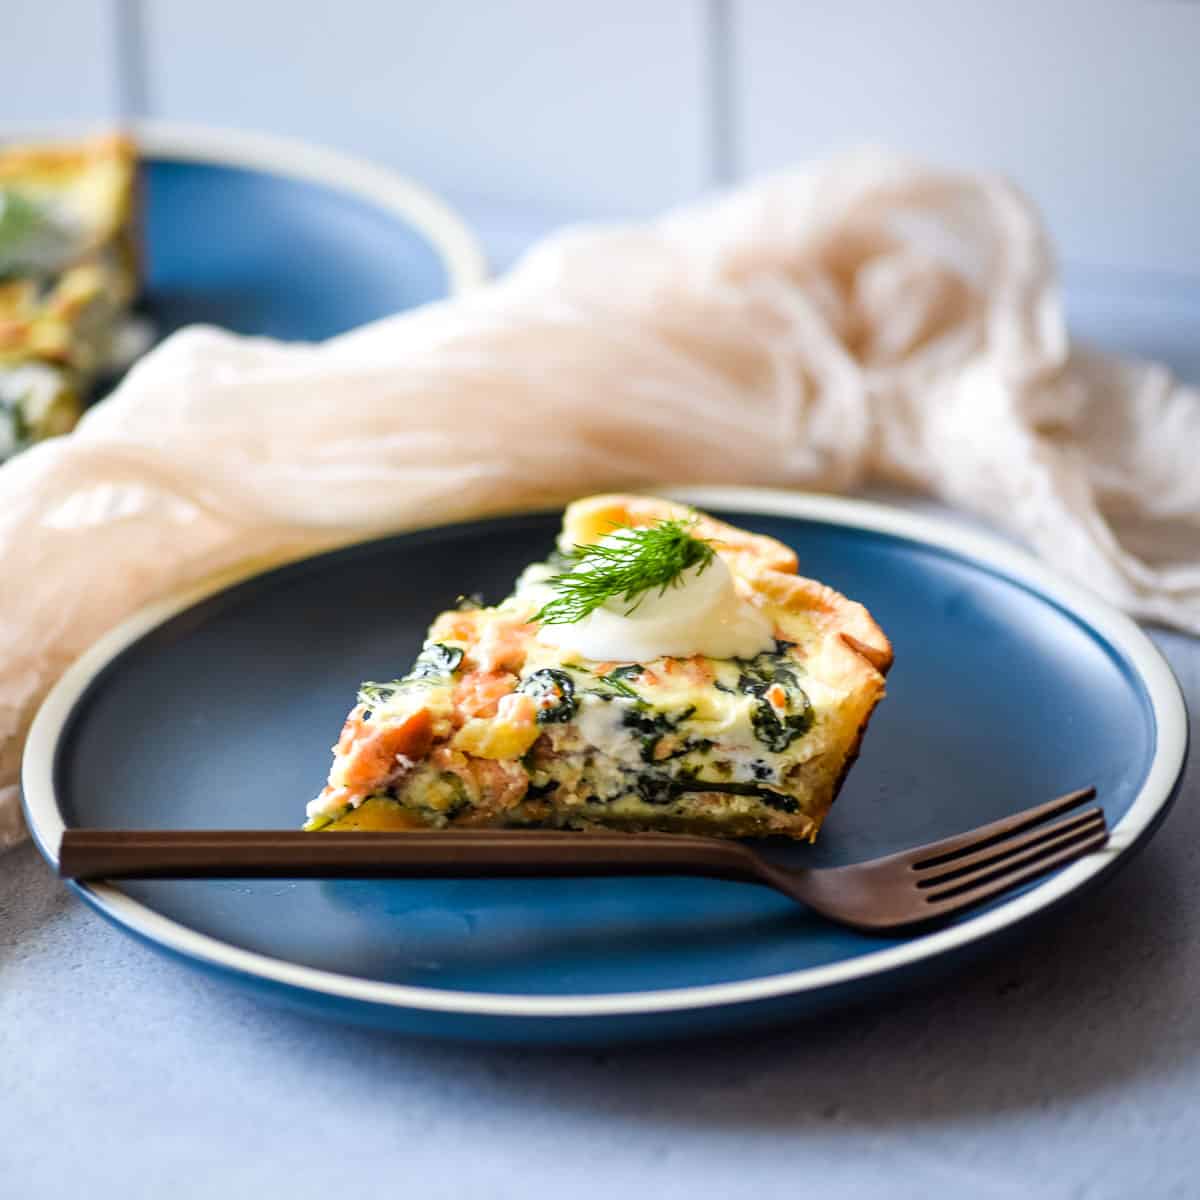 Side view of a slice of salmon spinach quiche on a dark blue plate with a copper fork.